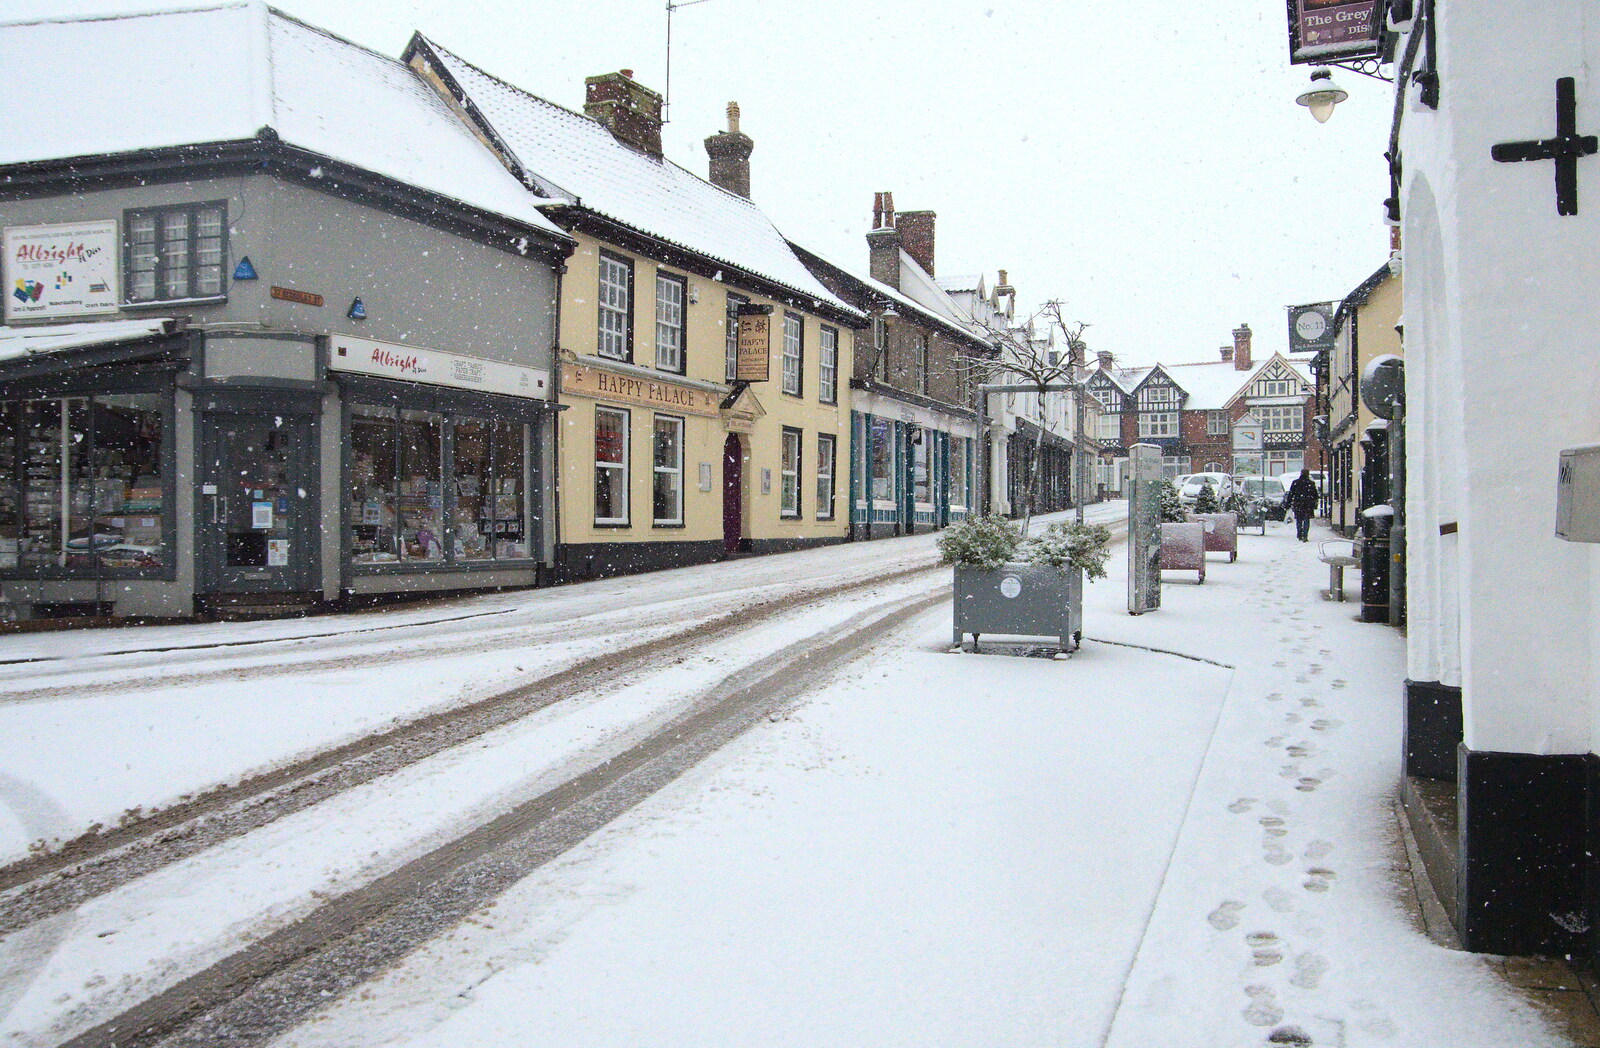 The very top of St. Nicholas Street from A Snowy Morning, Diss, Norfolk - 16th January 2021